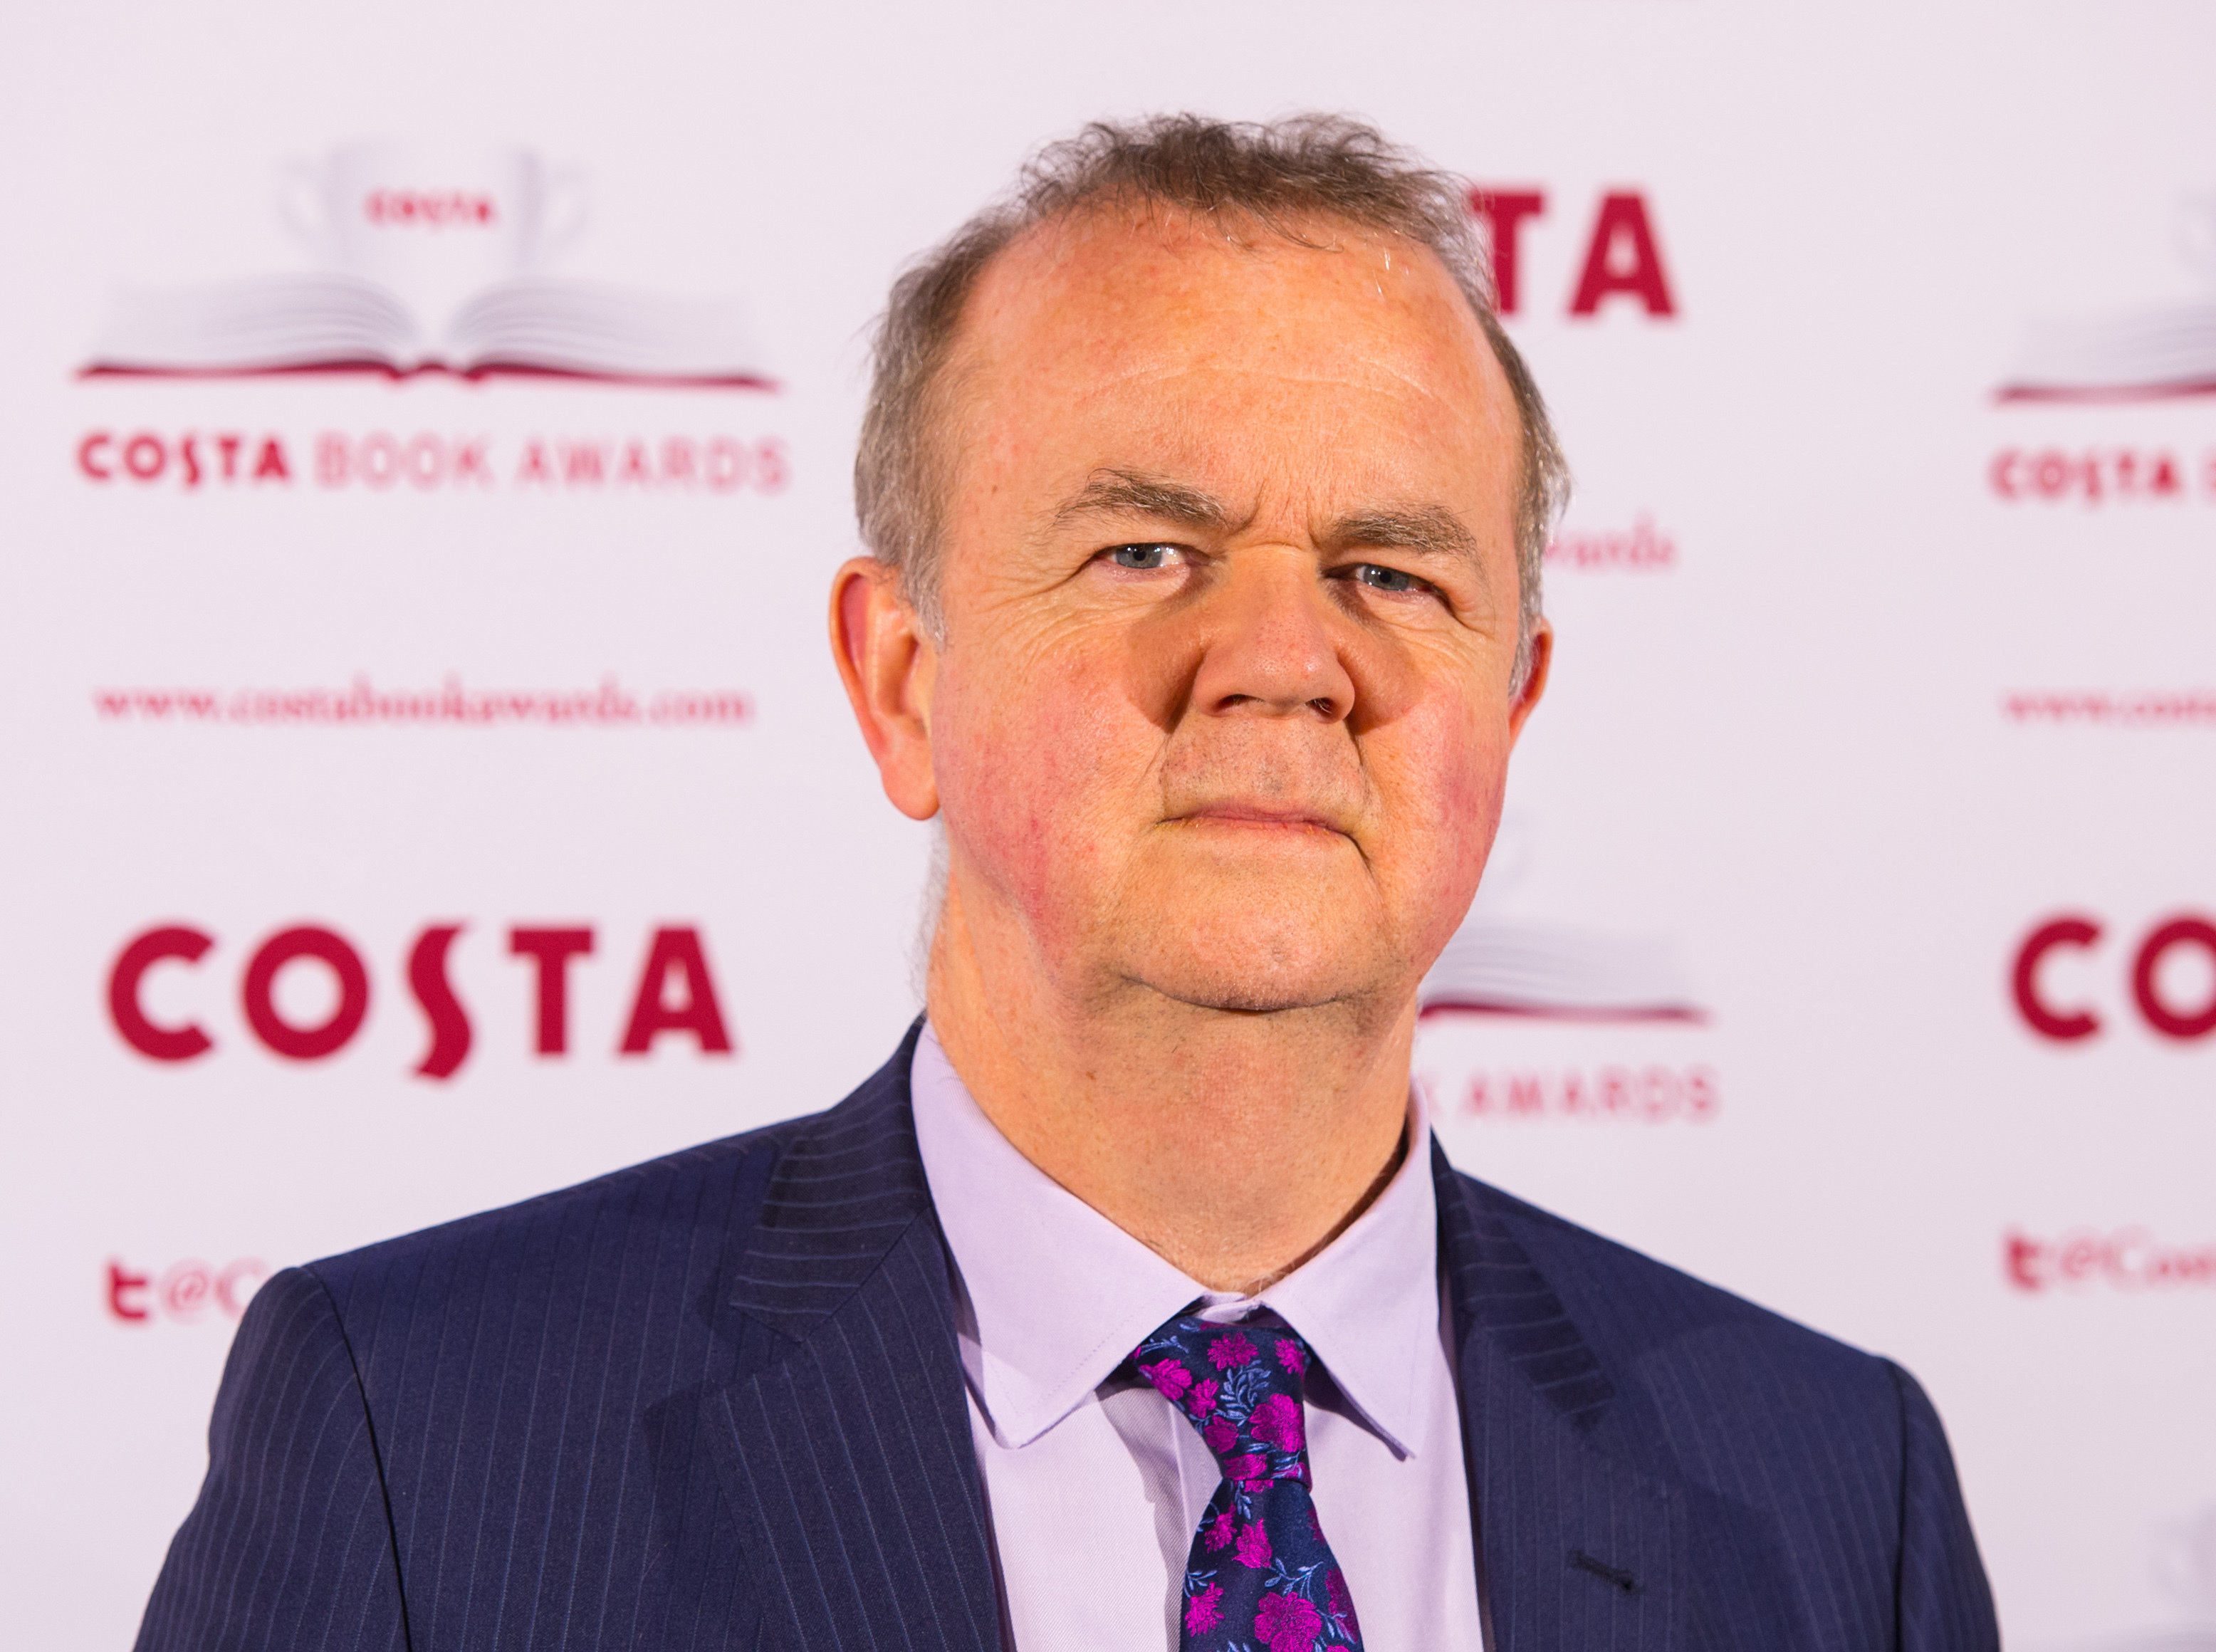 <strong>Ian Hislop and other HIGNFY panelists were accused of trying to 'downplay' Westminster sexual harassment allegations&nbsp;</strong>